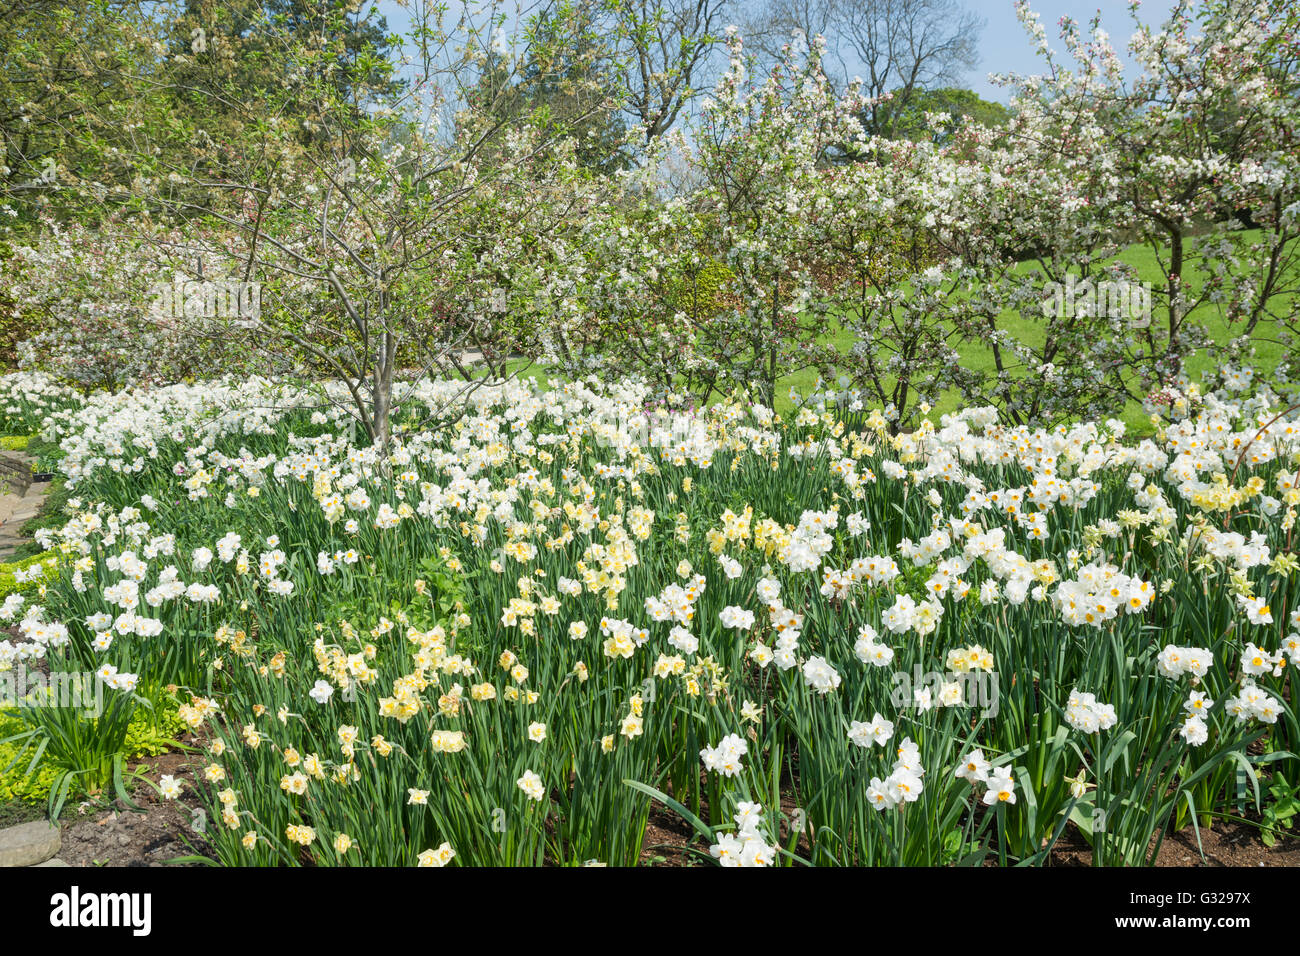 White daffodils and apple blossom Stock Photo